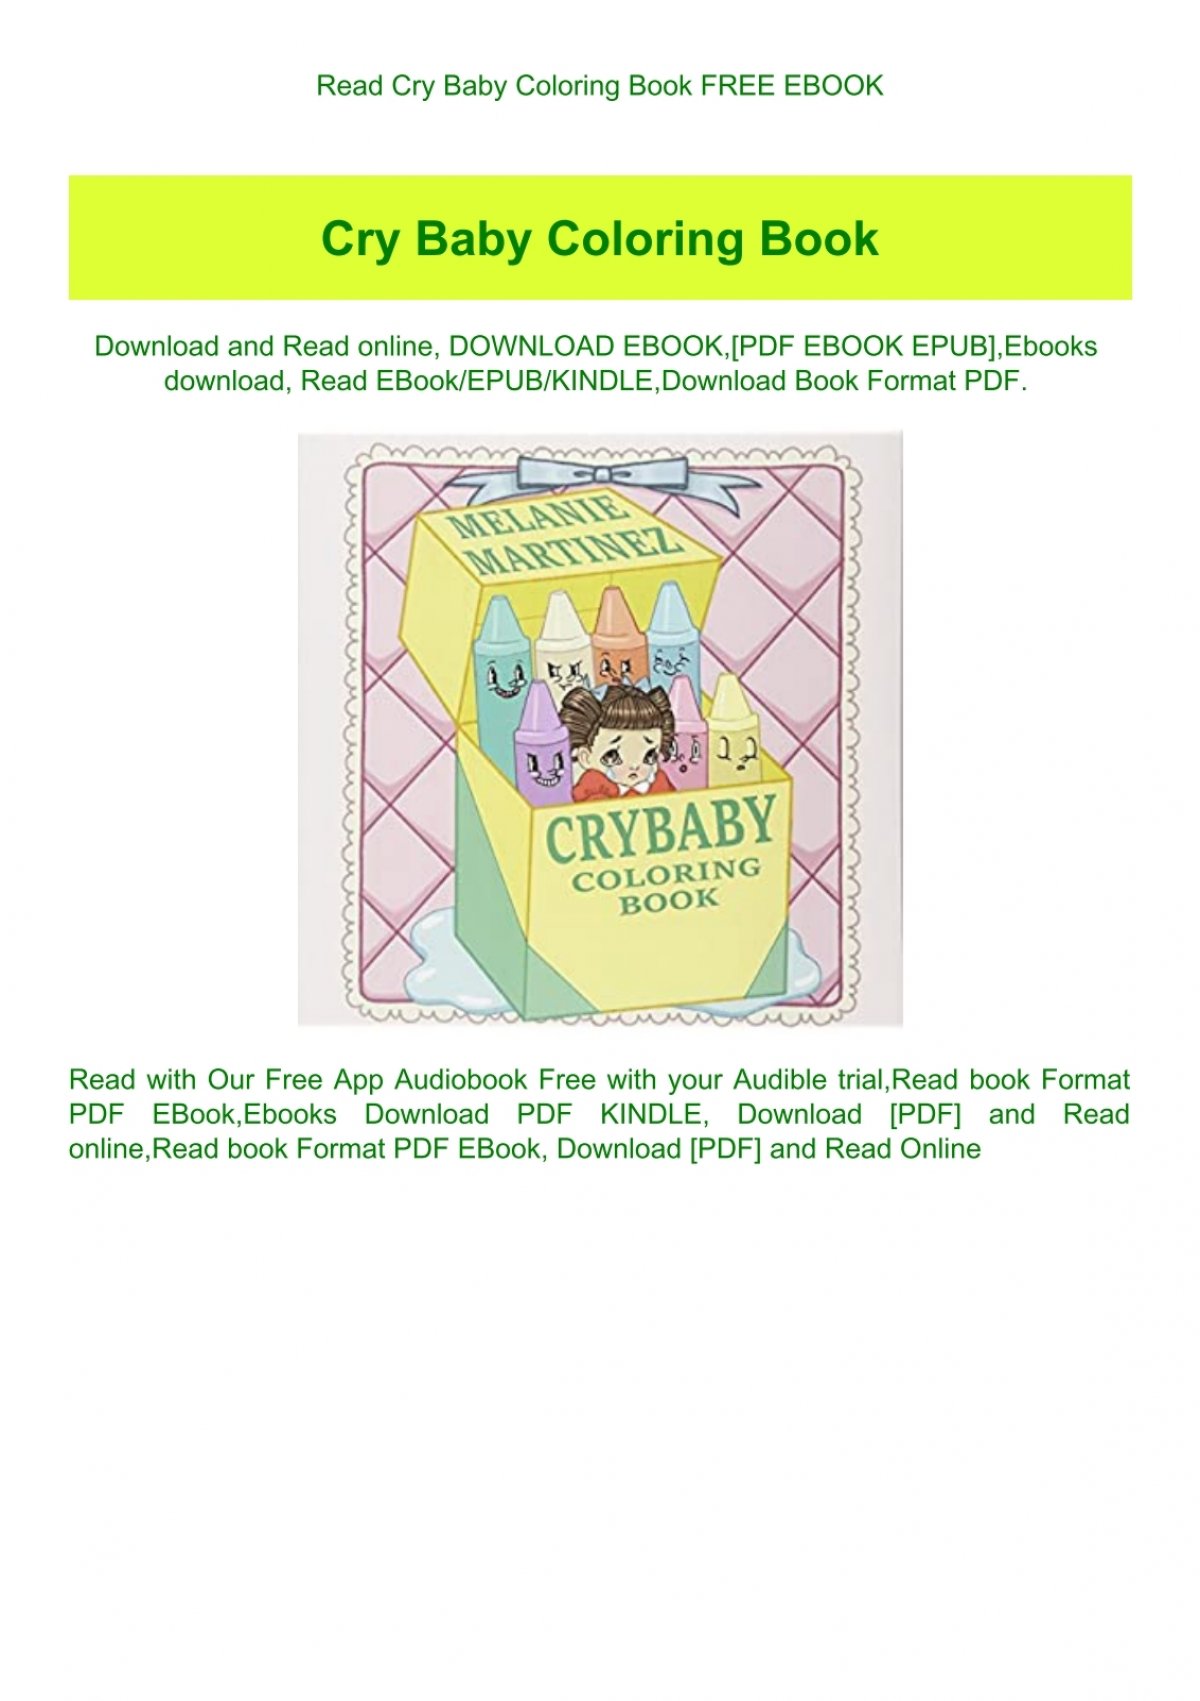 Download Read Cry Baby Coloring Book Free Ebook